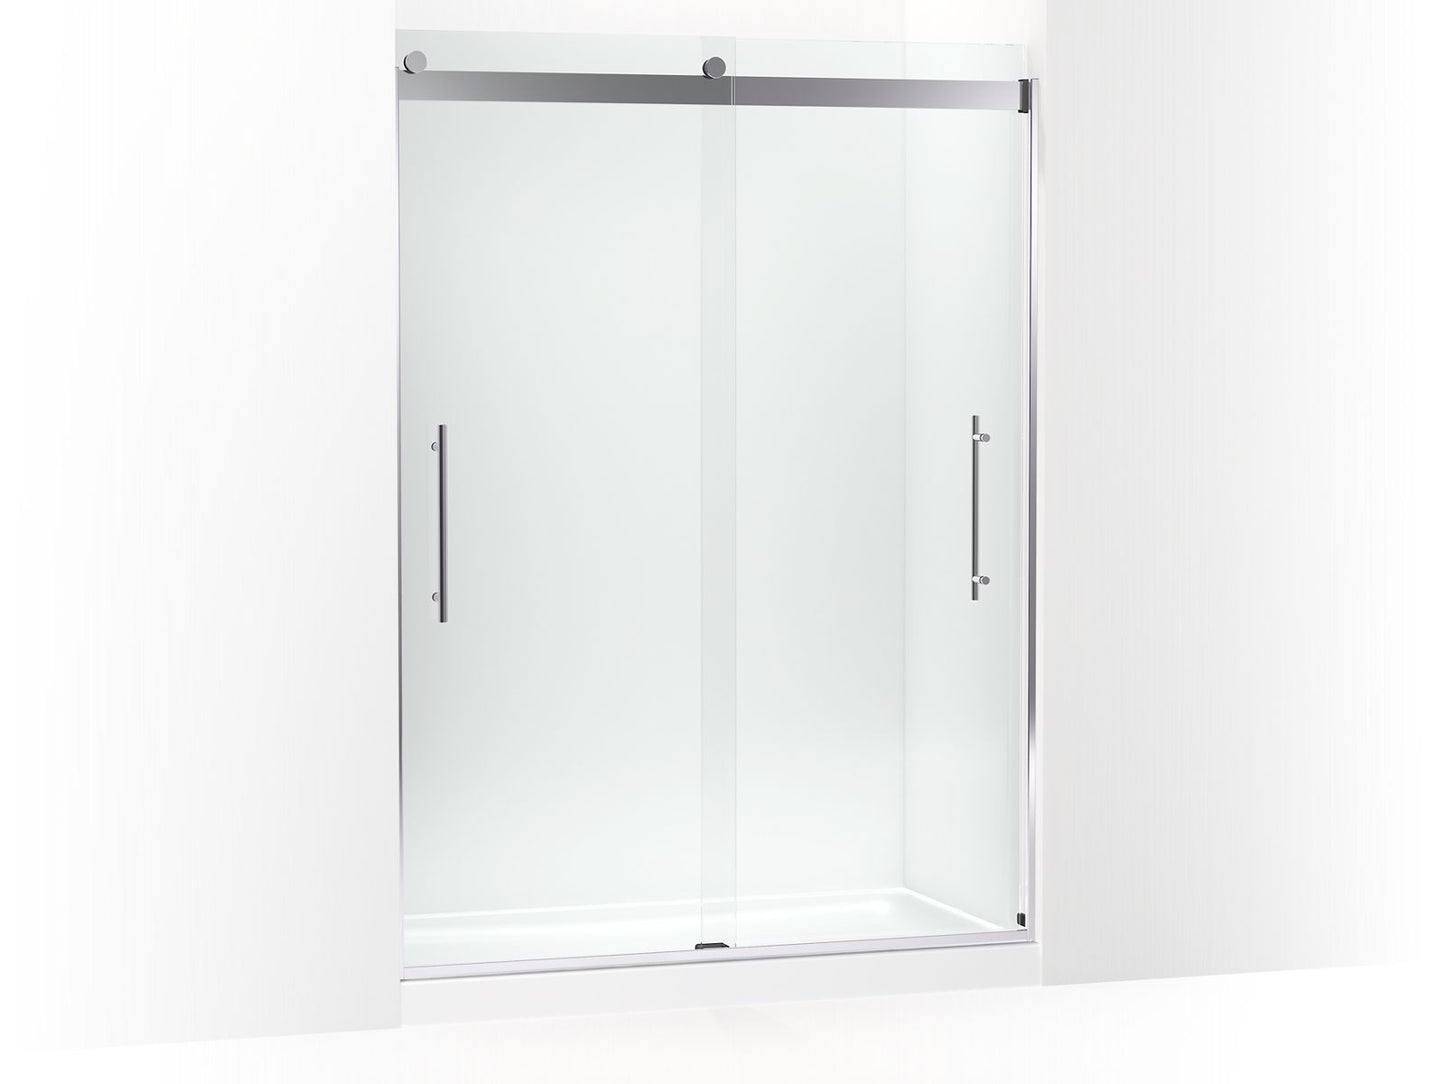 KOHLER K-702429-L-SHP Levity Plus Frameless Sliding Shower Door, 81-5/8" H X 56-5/8 - 59-5/8" W, With 3/8"-Thick Crystal Clear Glass In Bright Polished Silver